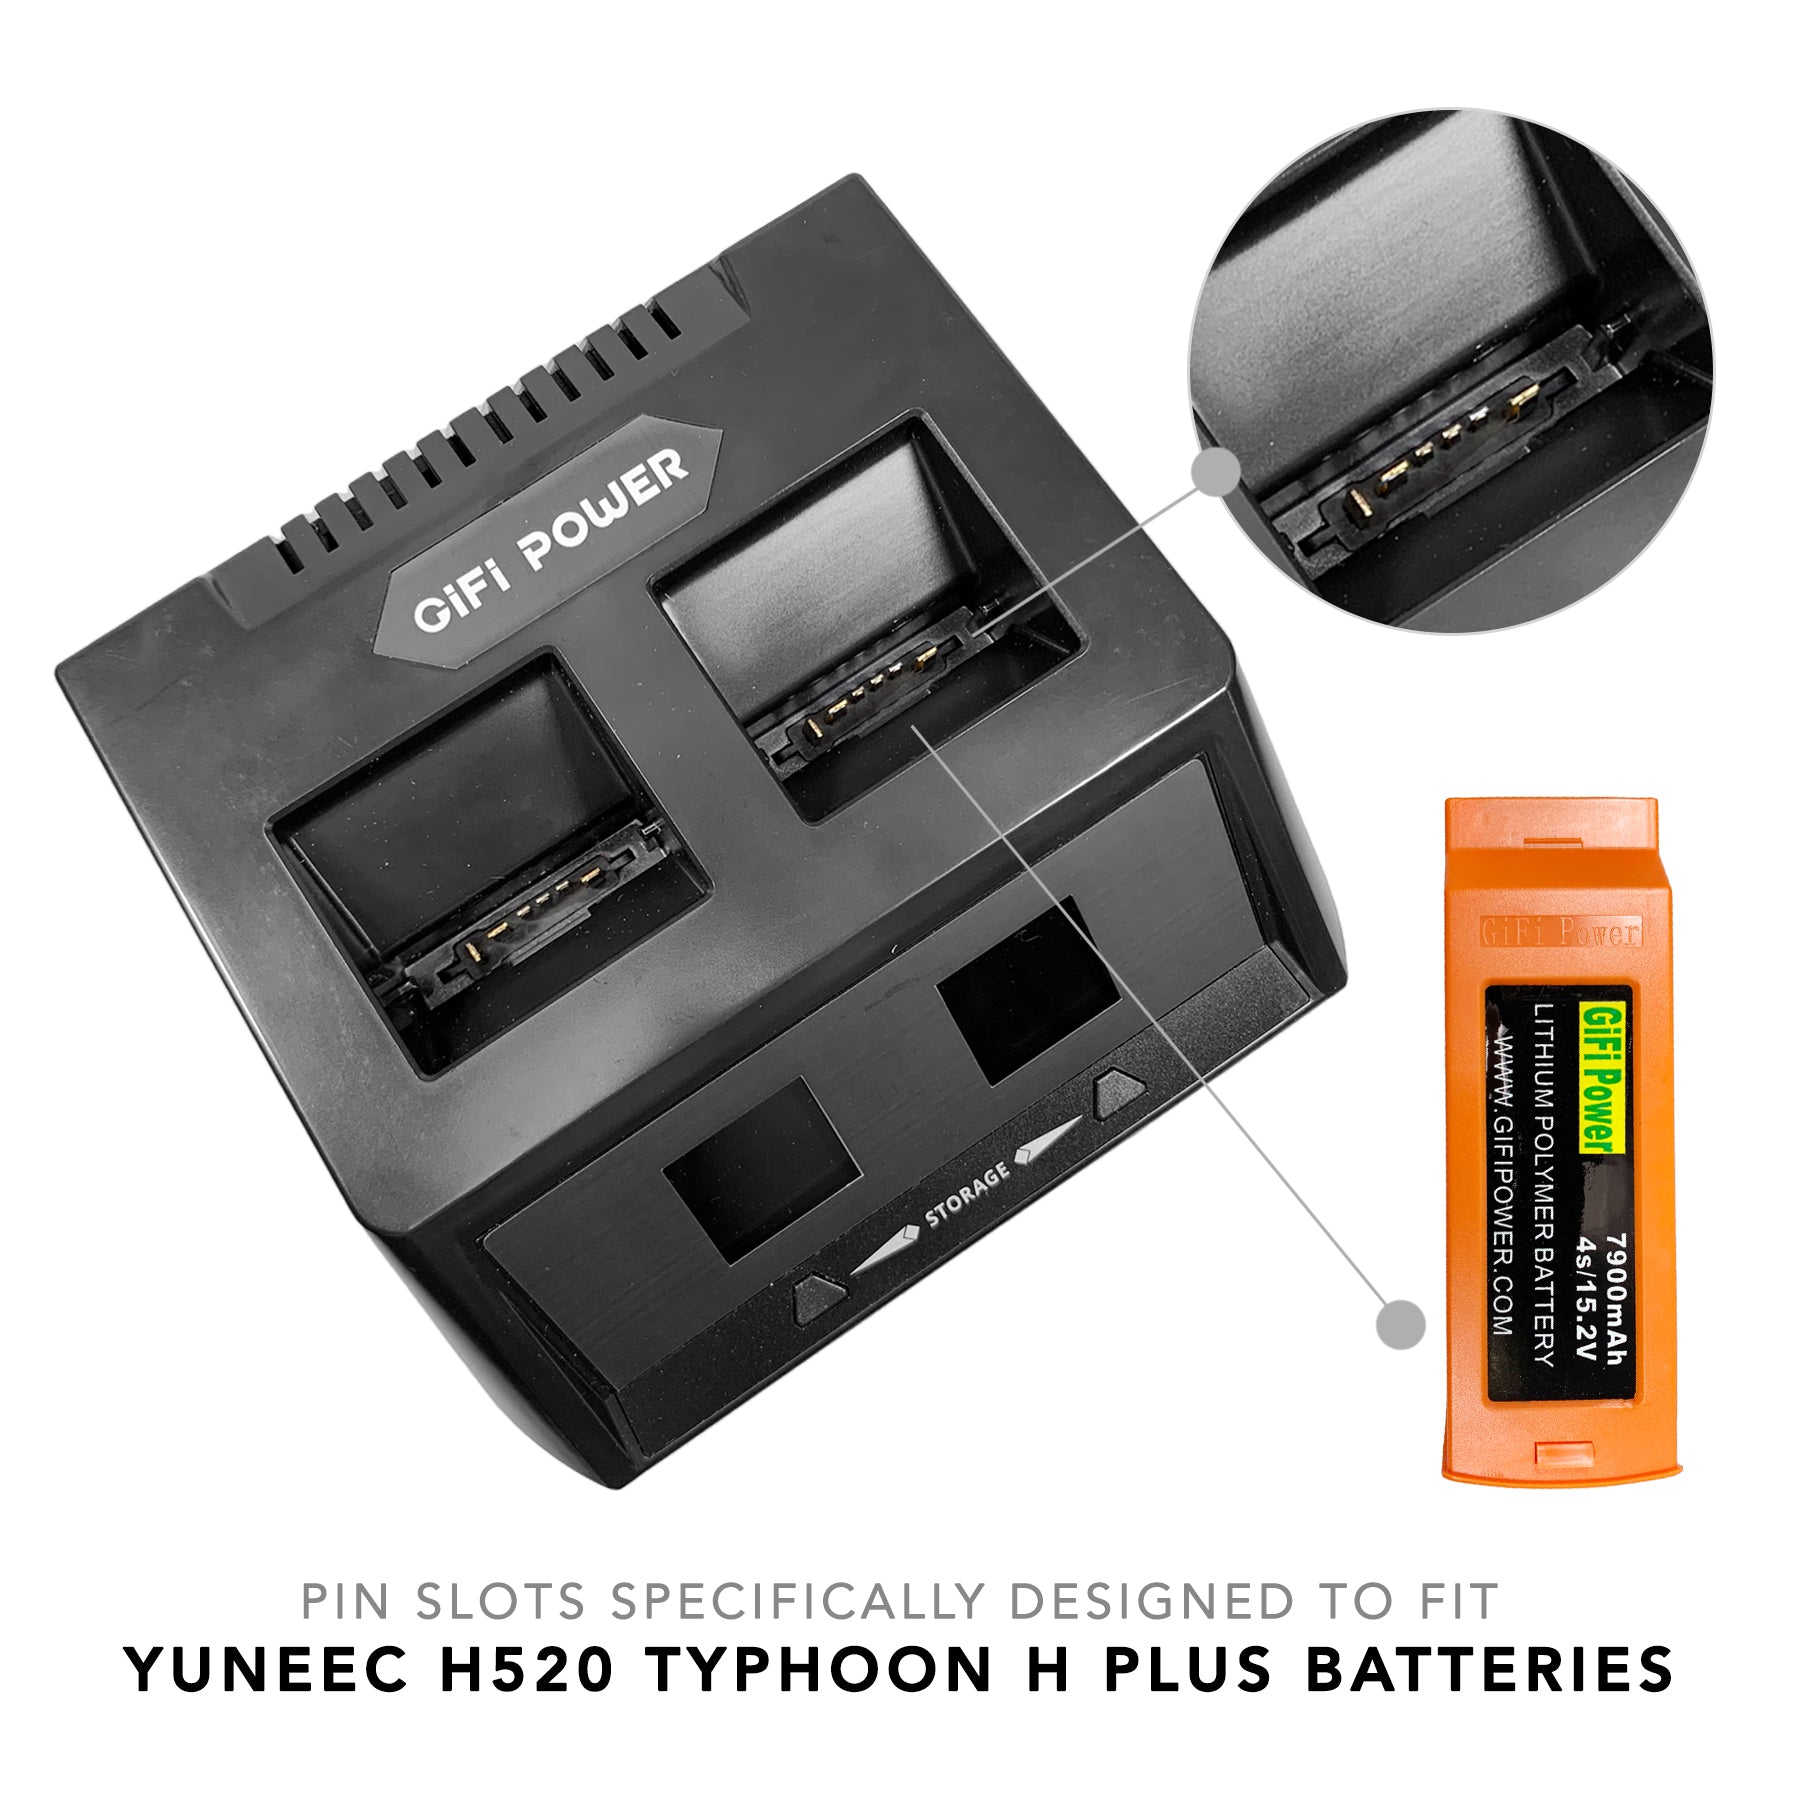 2-in-1 Fast Battery Balance Charger For YUNEEC H520 Typhoon H Plus Battery & Transmitter